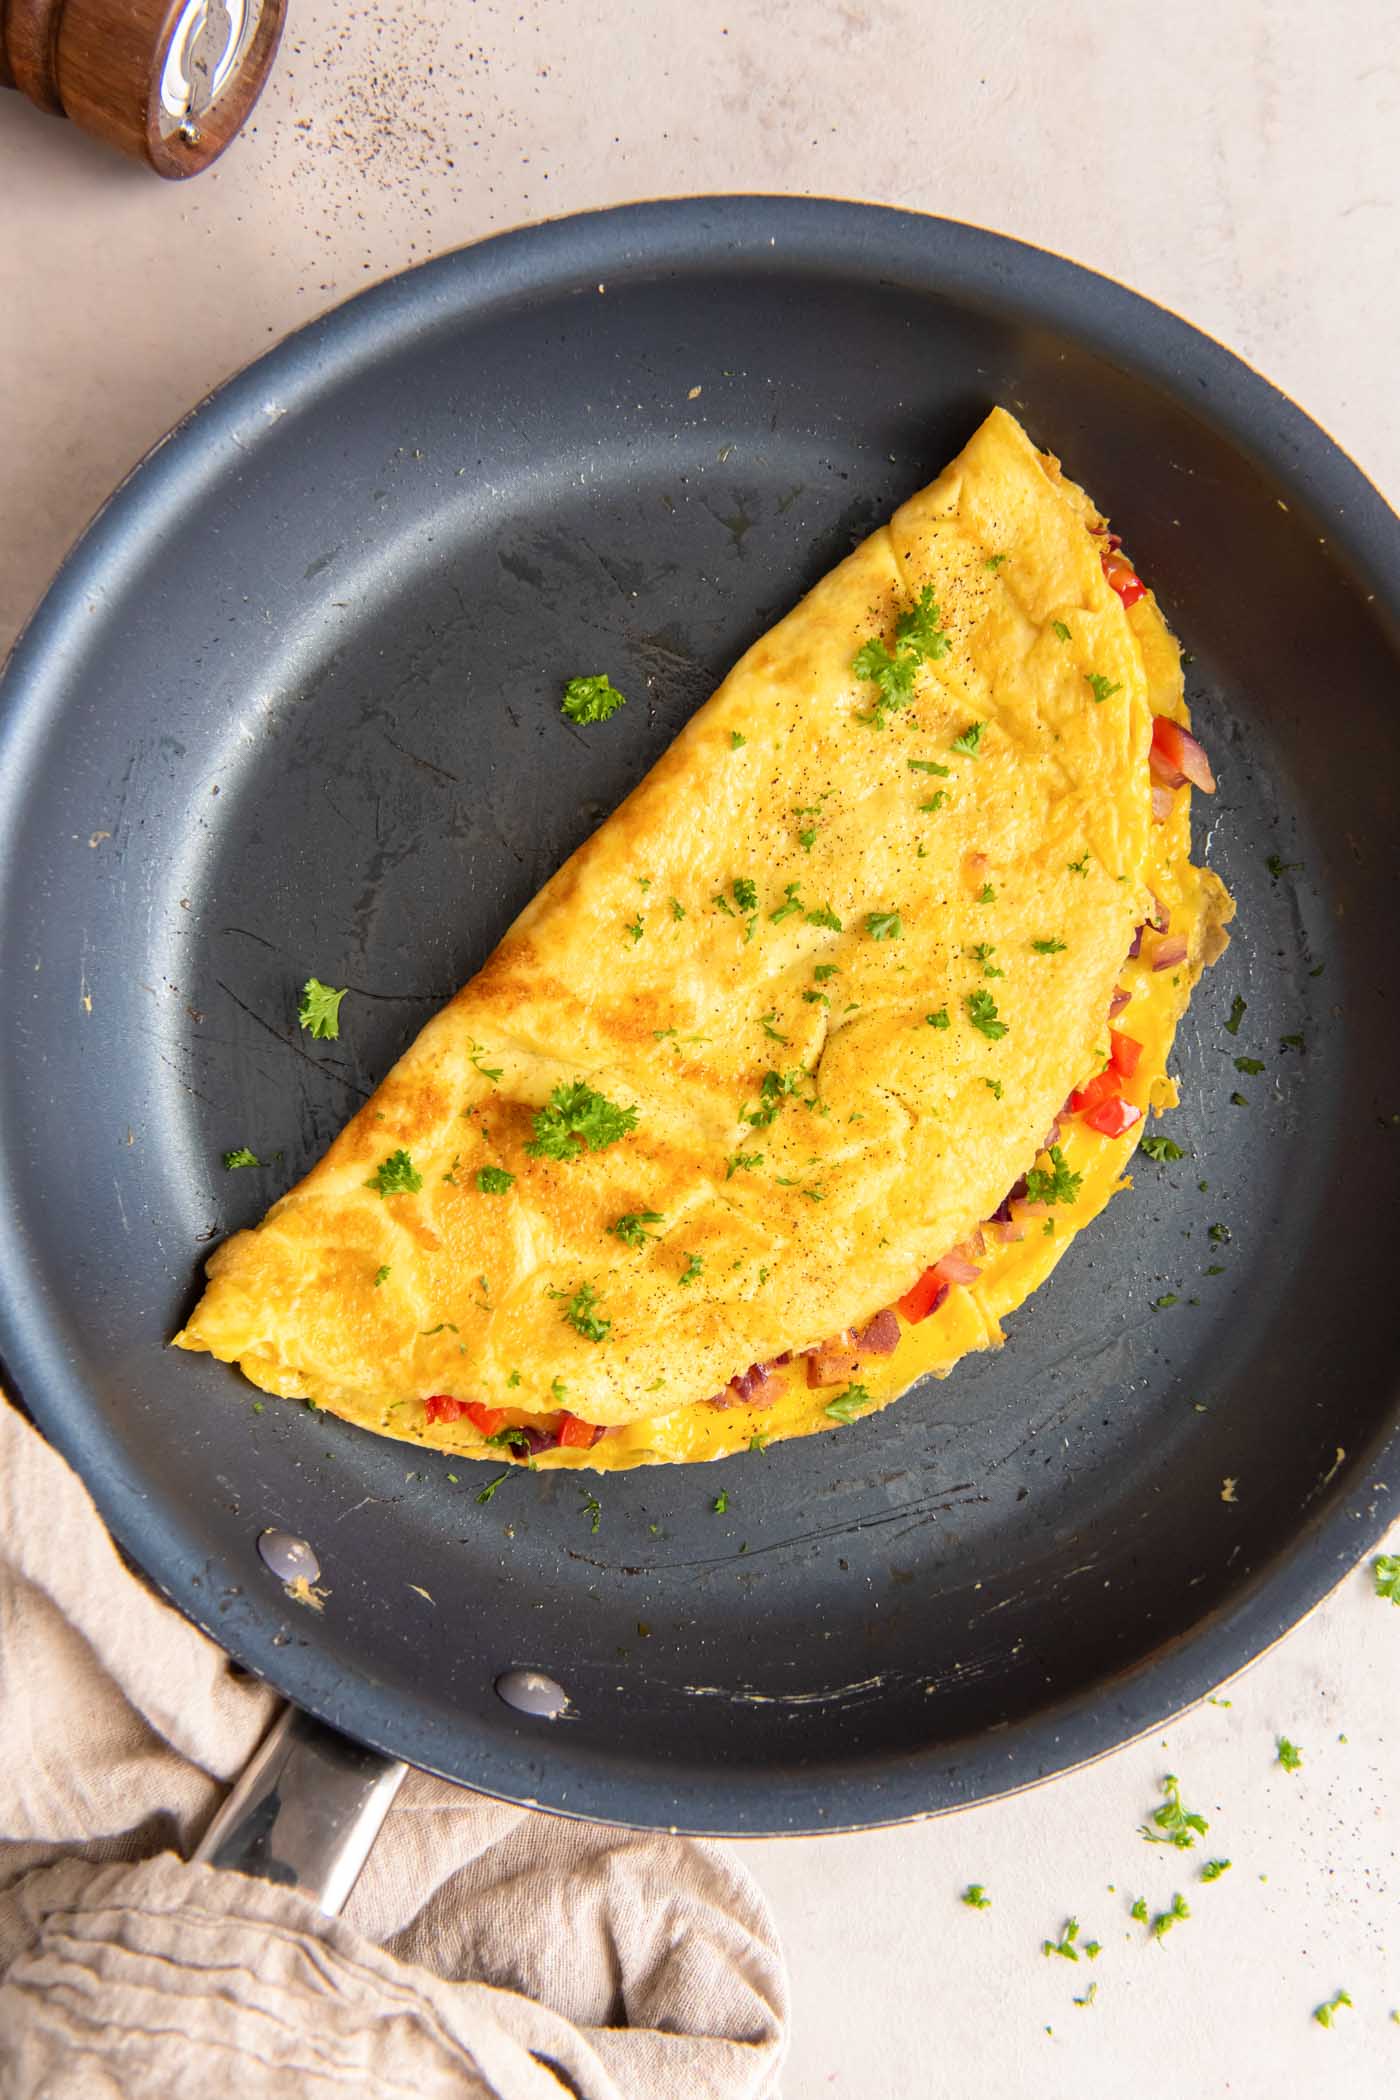 How To Make An Omelet Kristine S Kitchen